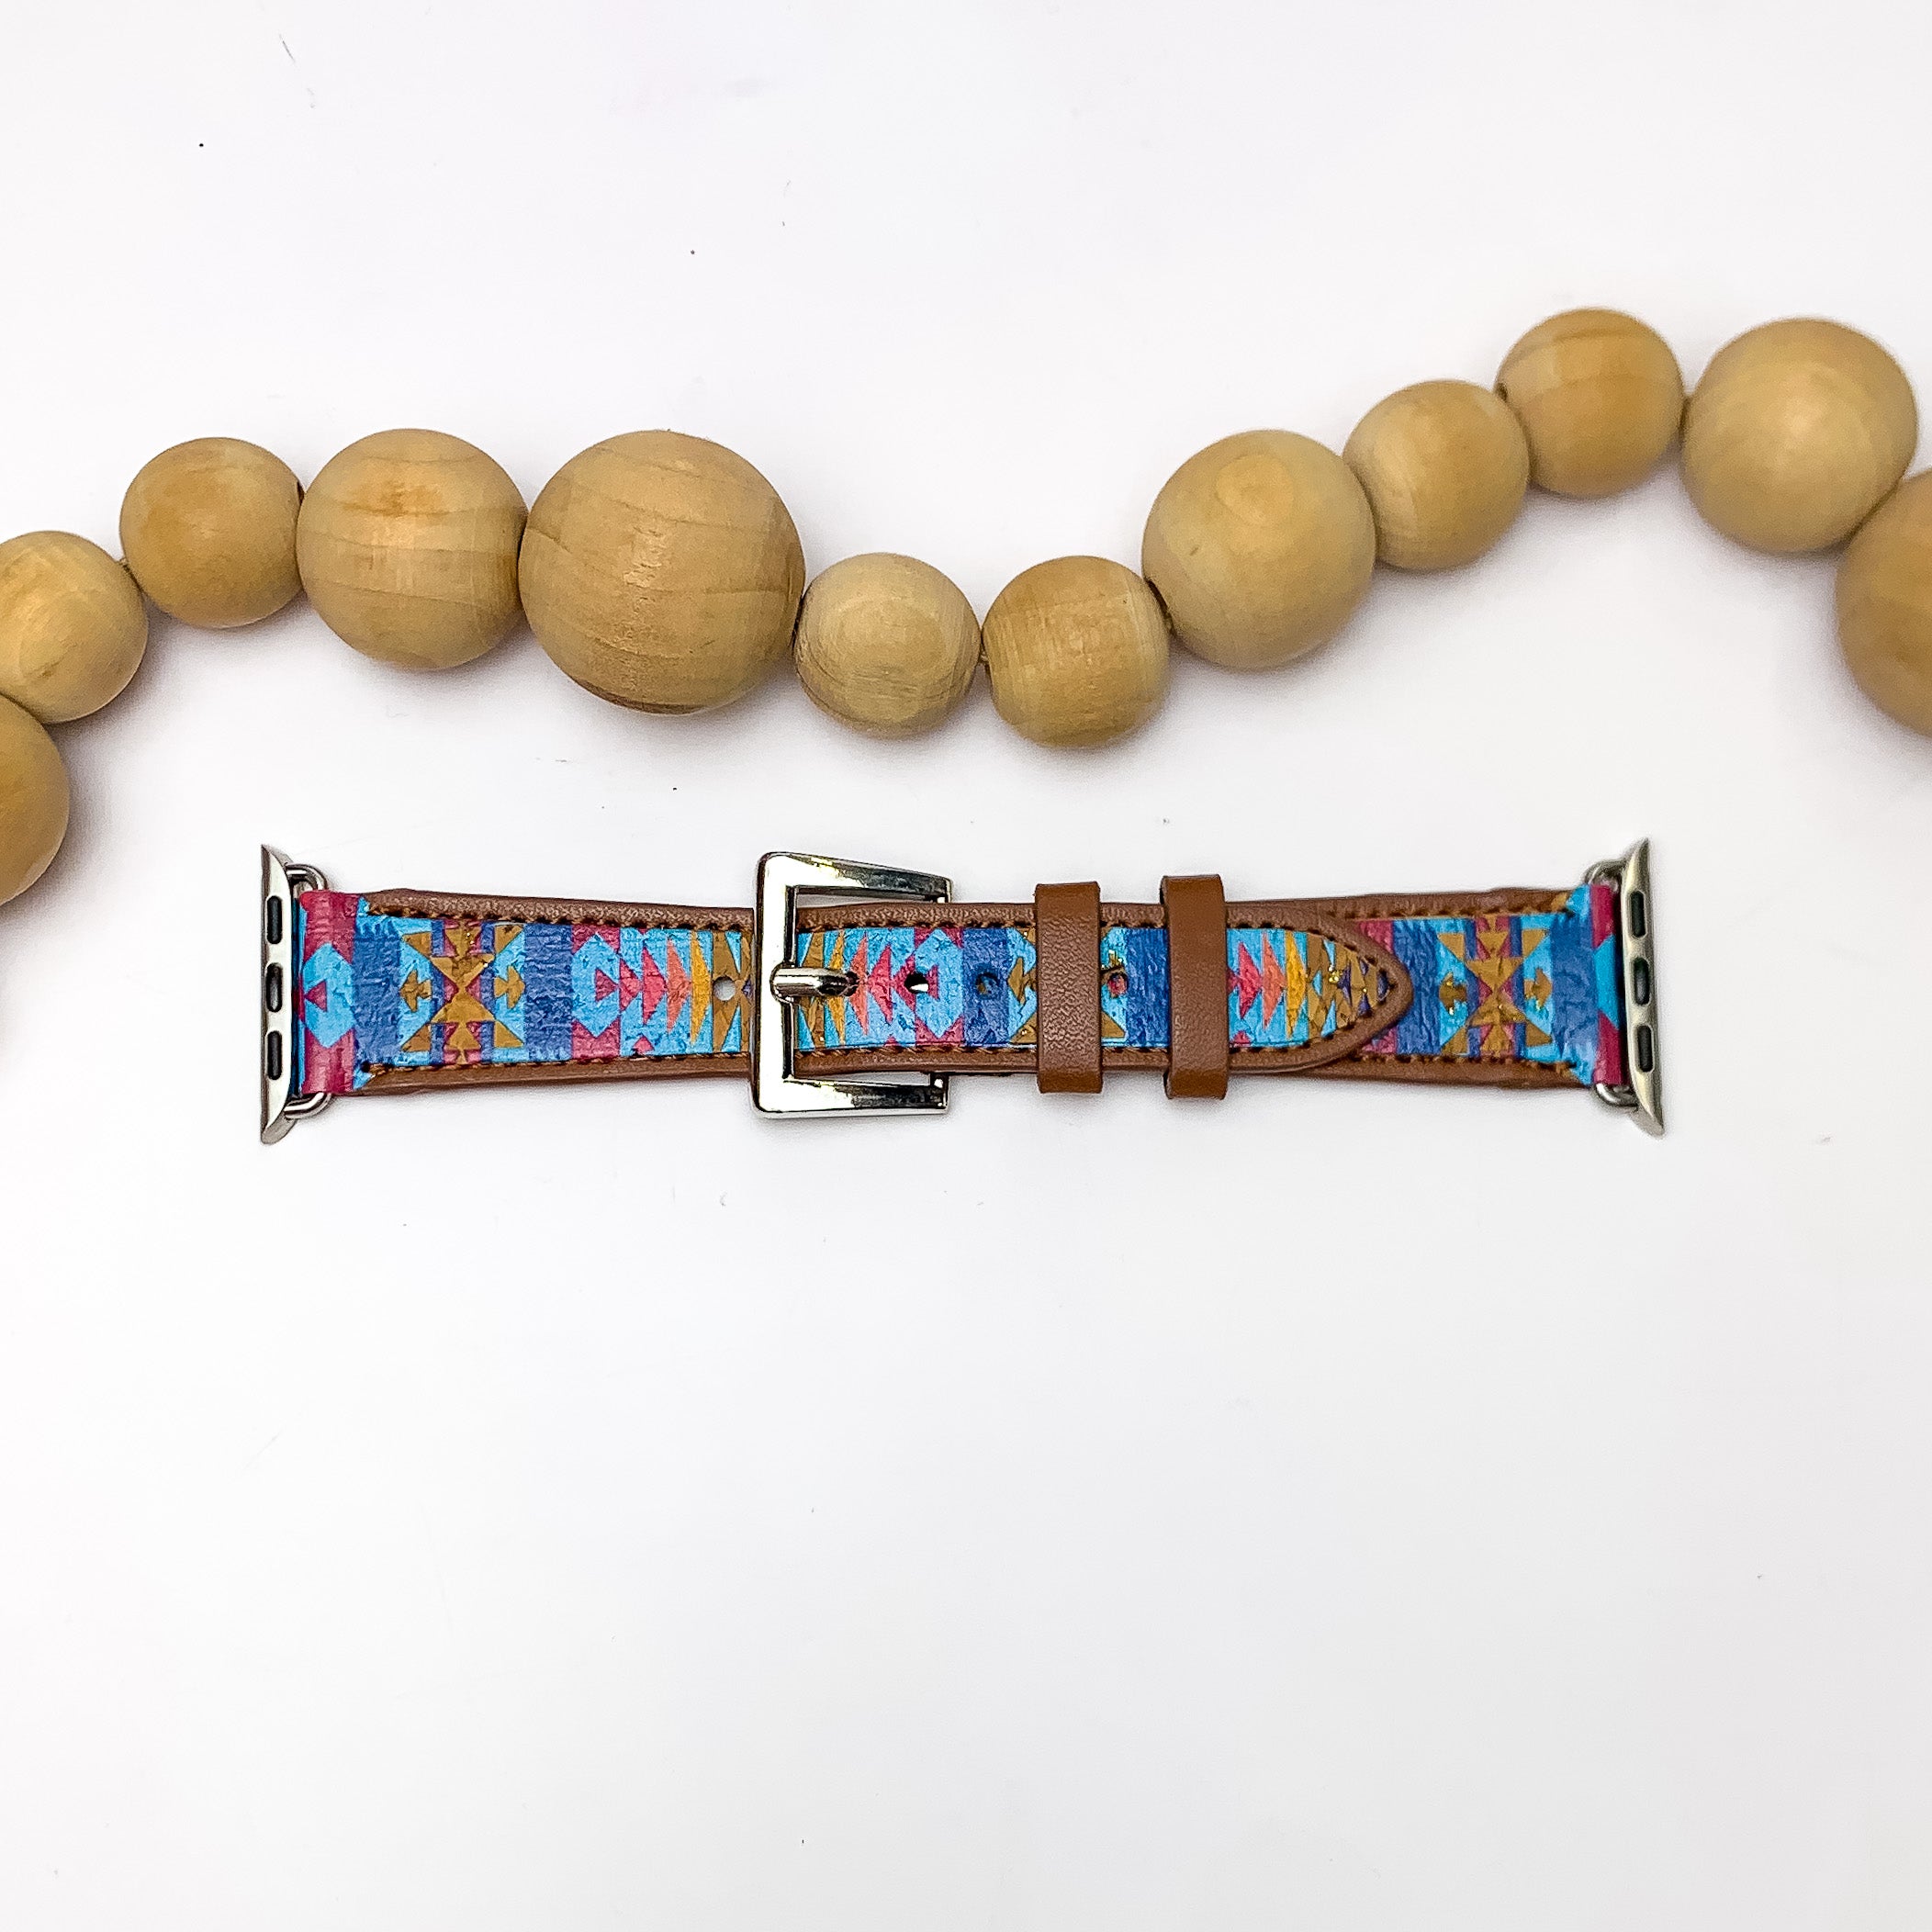 Tribal Printed Apple Watch Band in Blue Multicolor. Pictured on a white background with wood beads above the band for decoration.